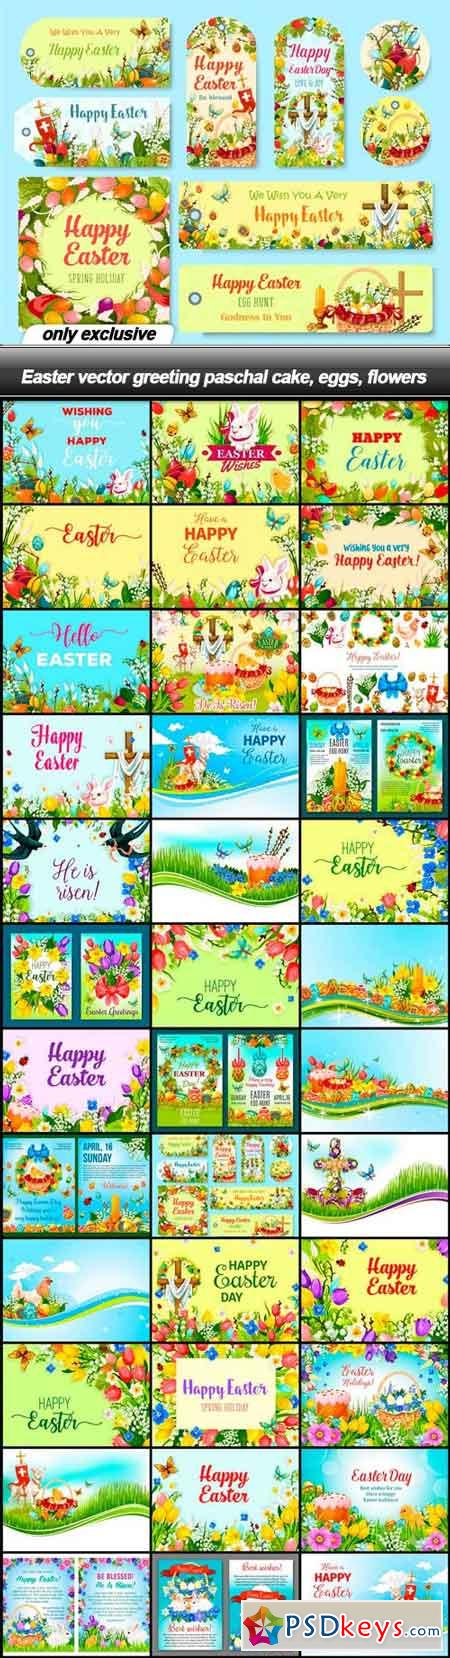 Easter vector greeting paschal cake, eggs, flowers - 38 EPS